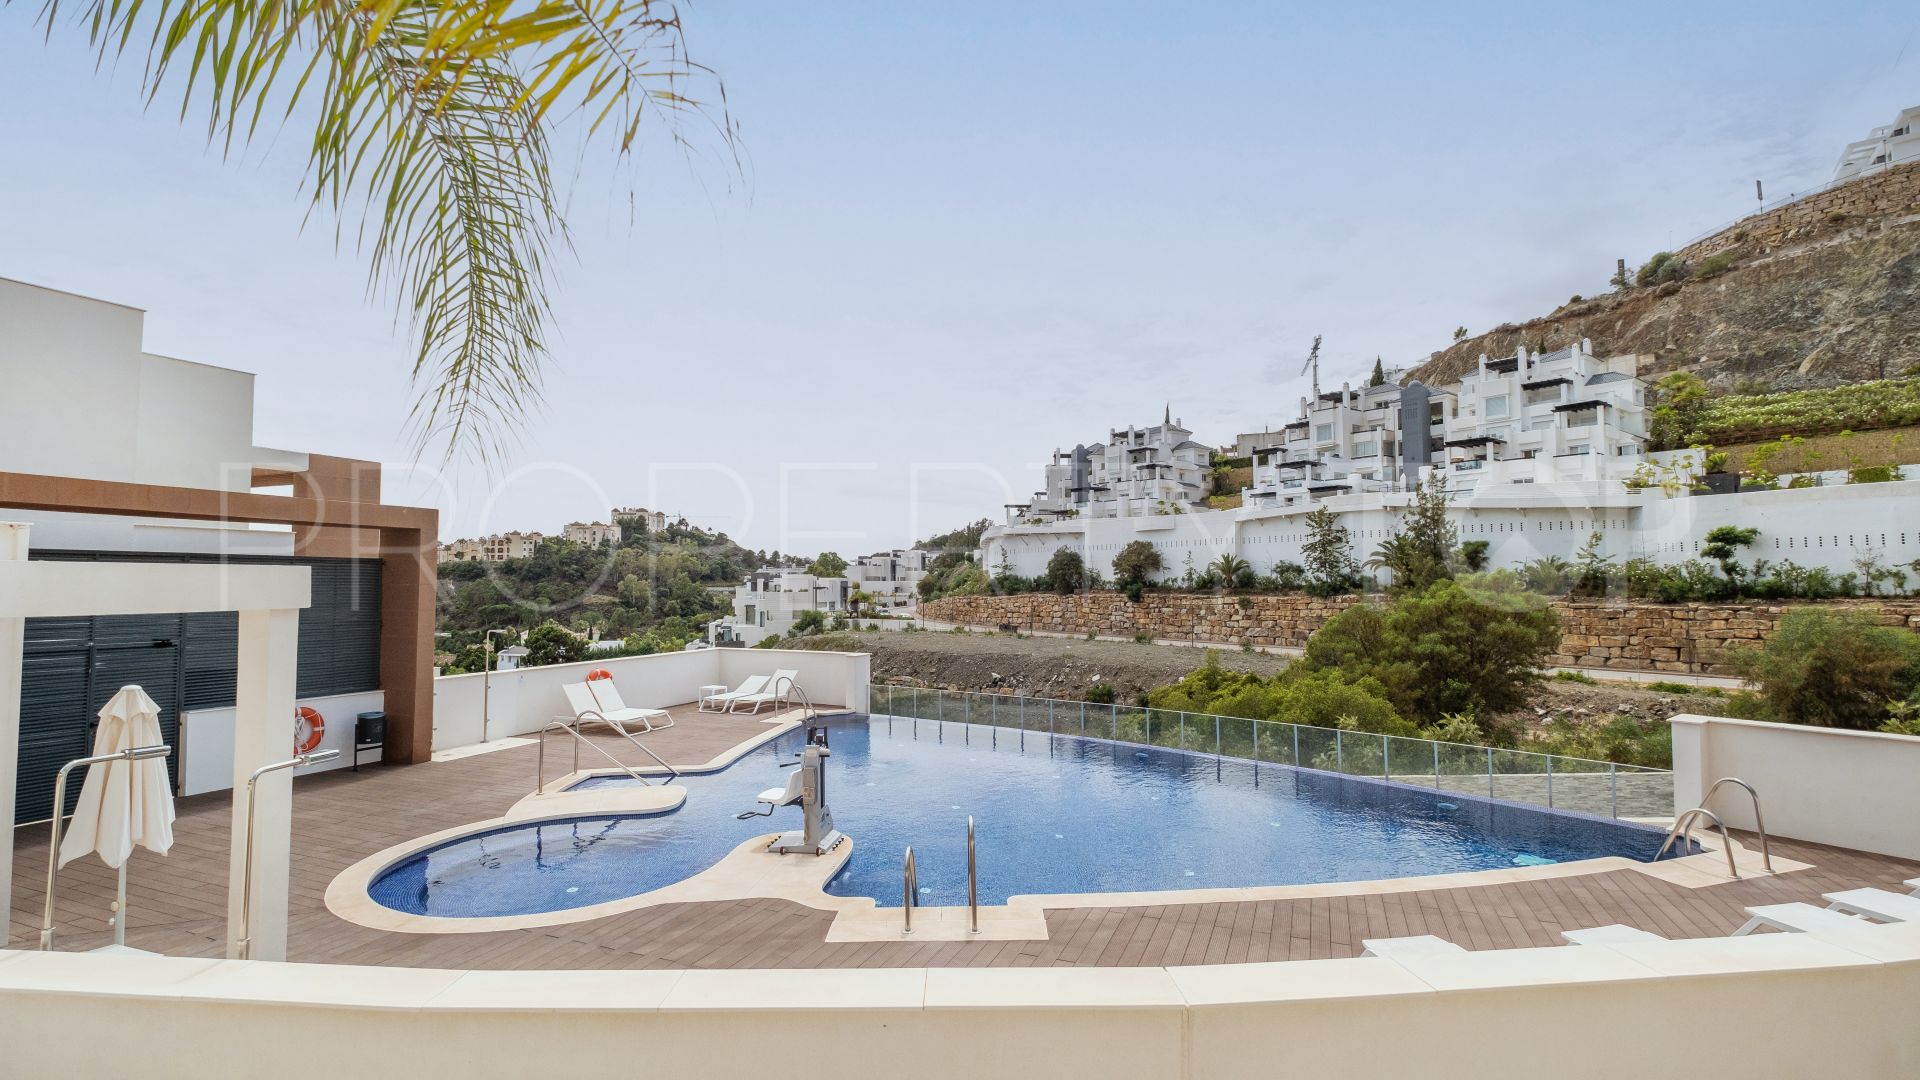 For sale La Quinta ground floor apartment with 4 bedrooms